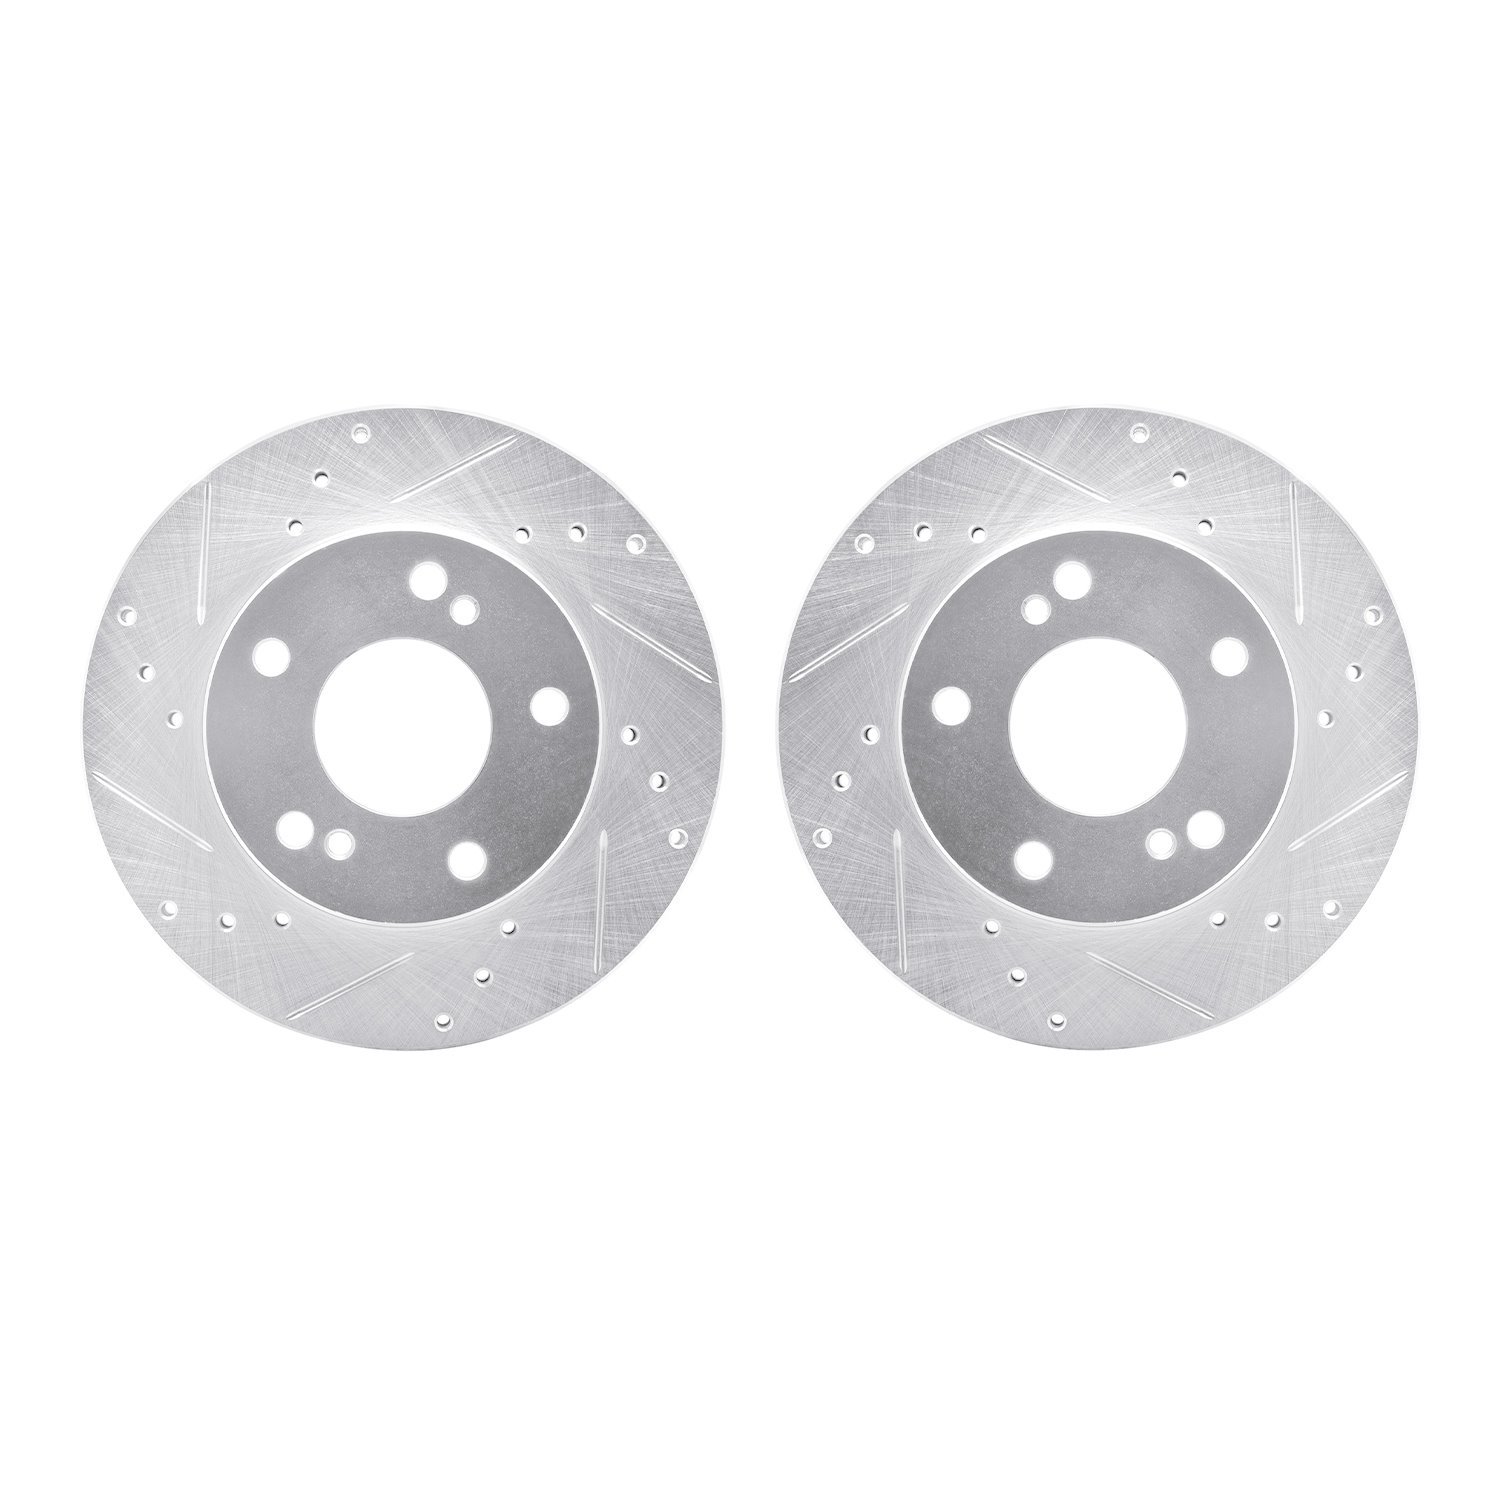 Drilled/Slotted Brake Rotors [Silver], 1996-1998 Infiniti/Nissan